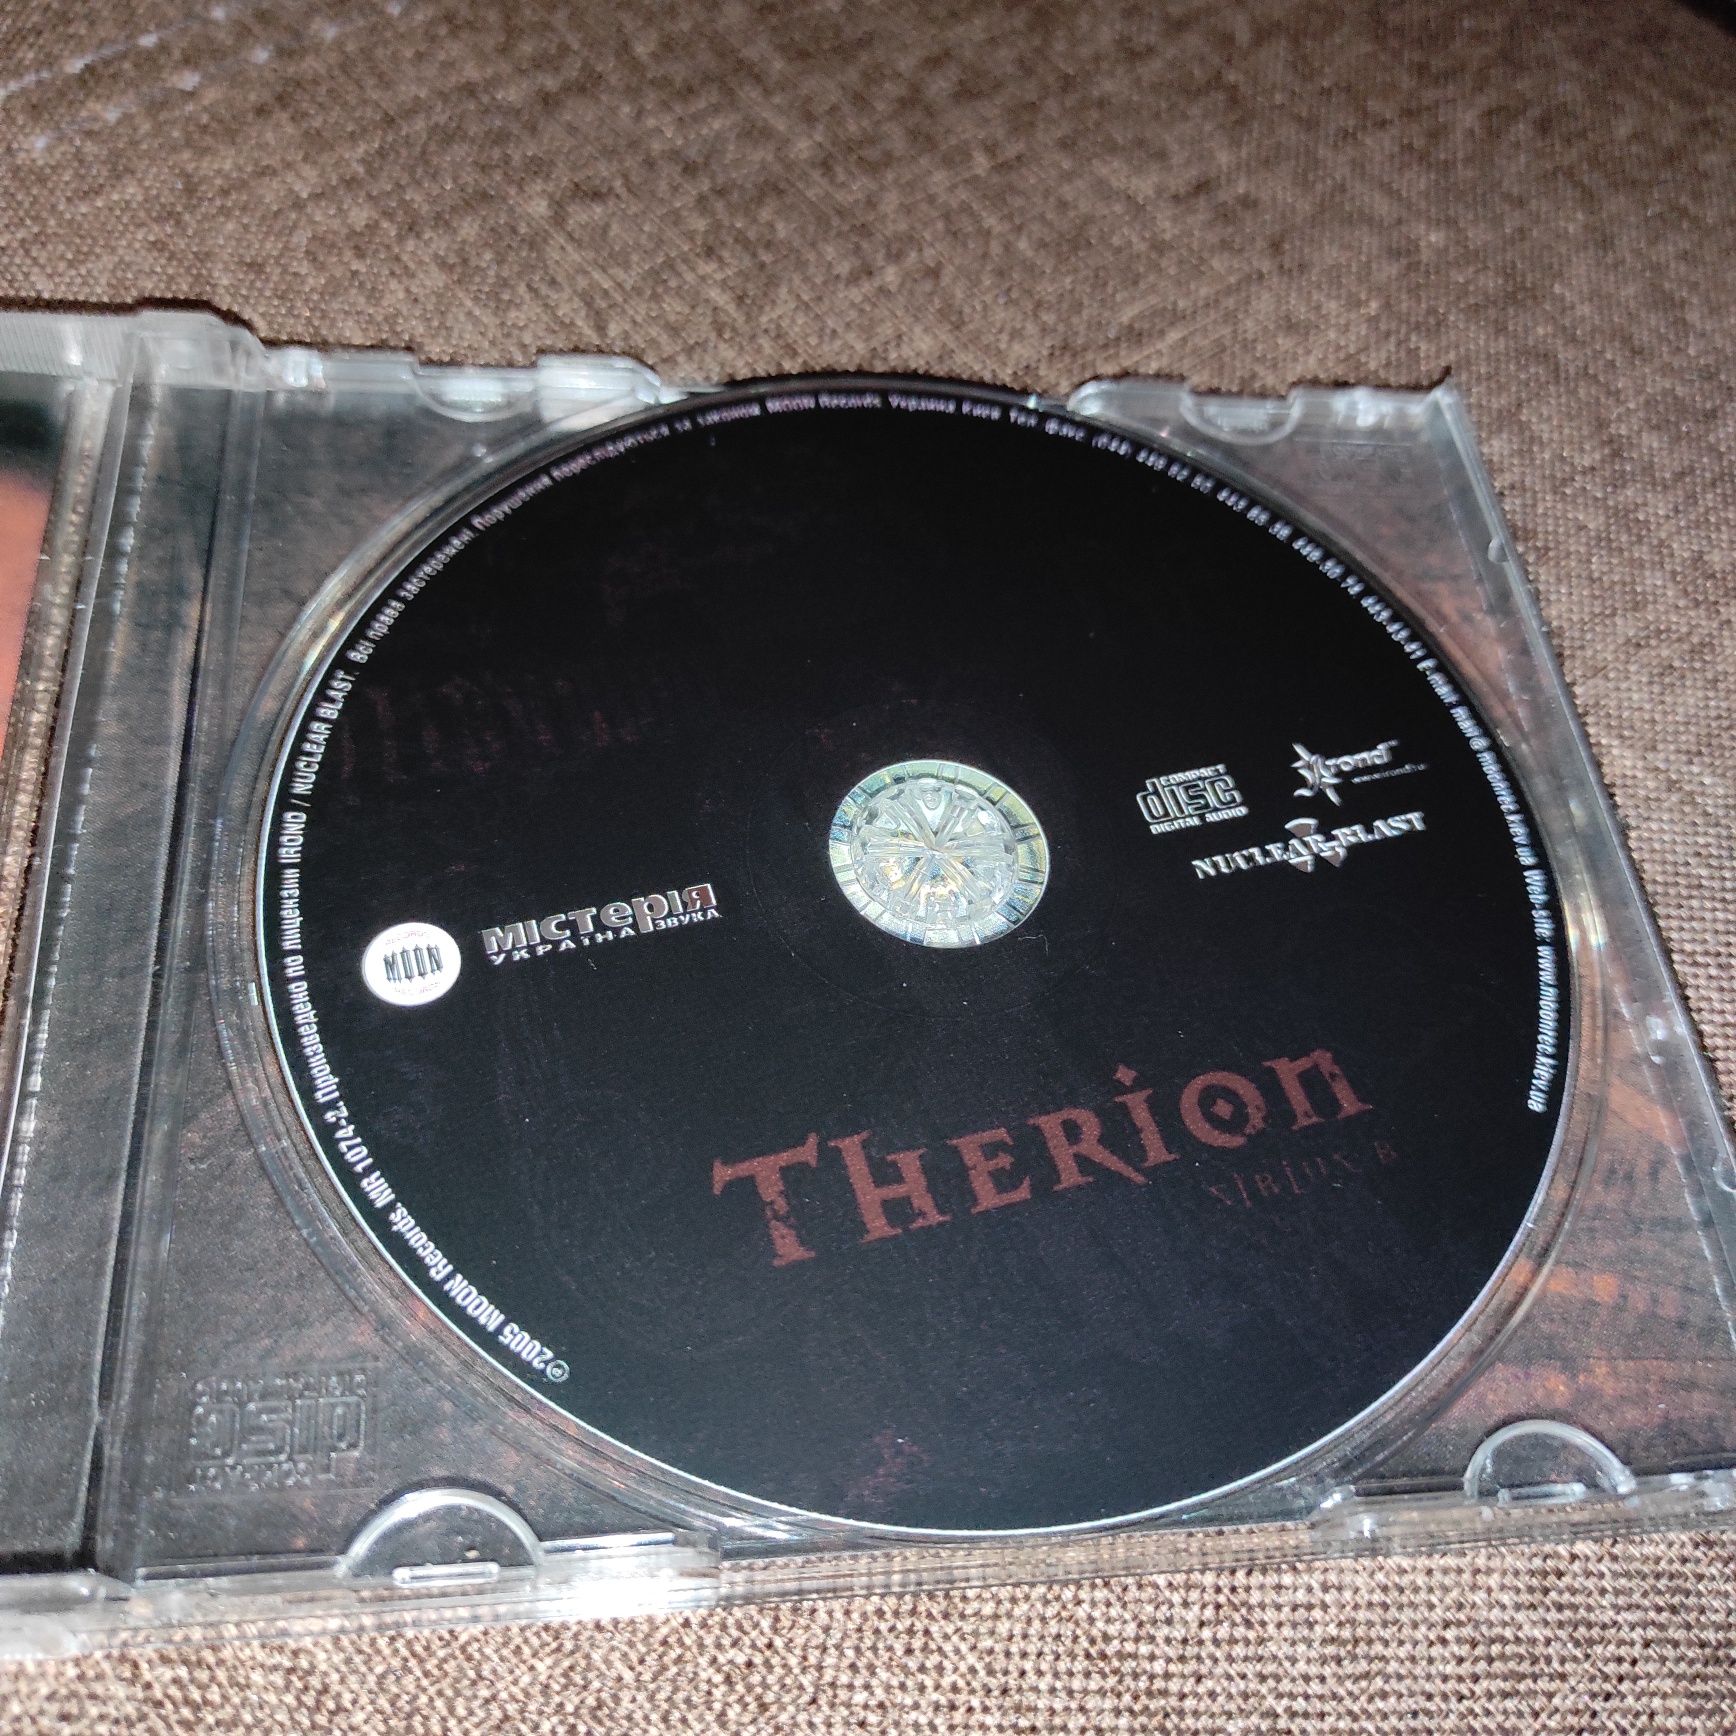 Therion "Sirius B" 2004